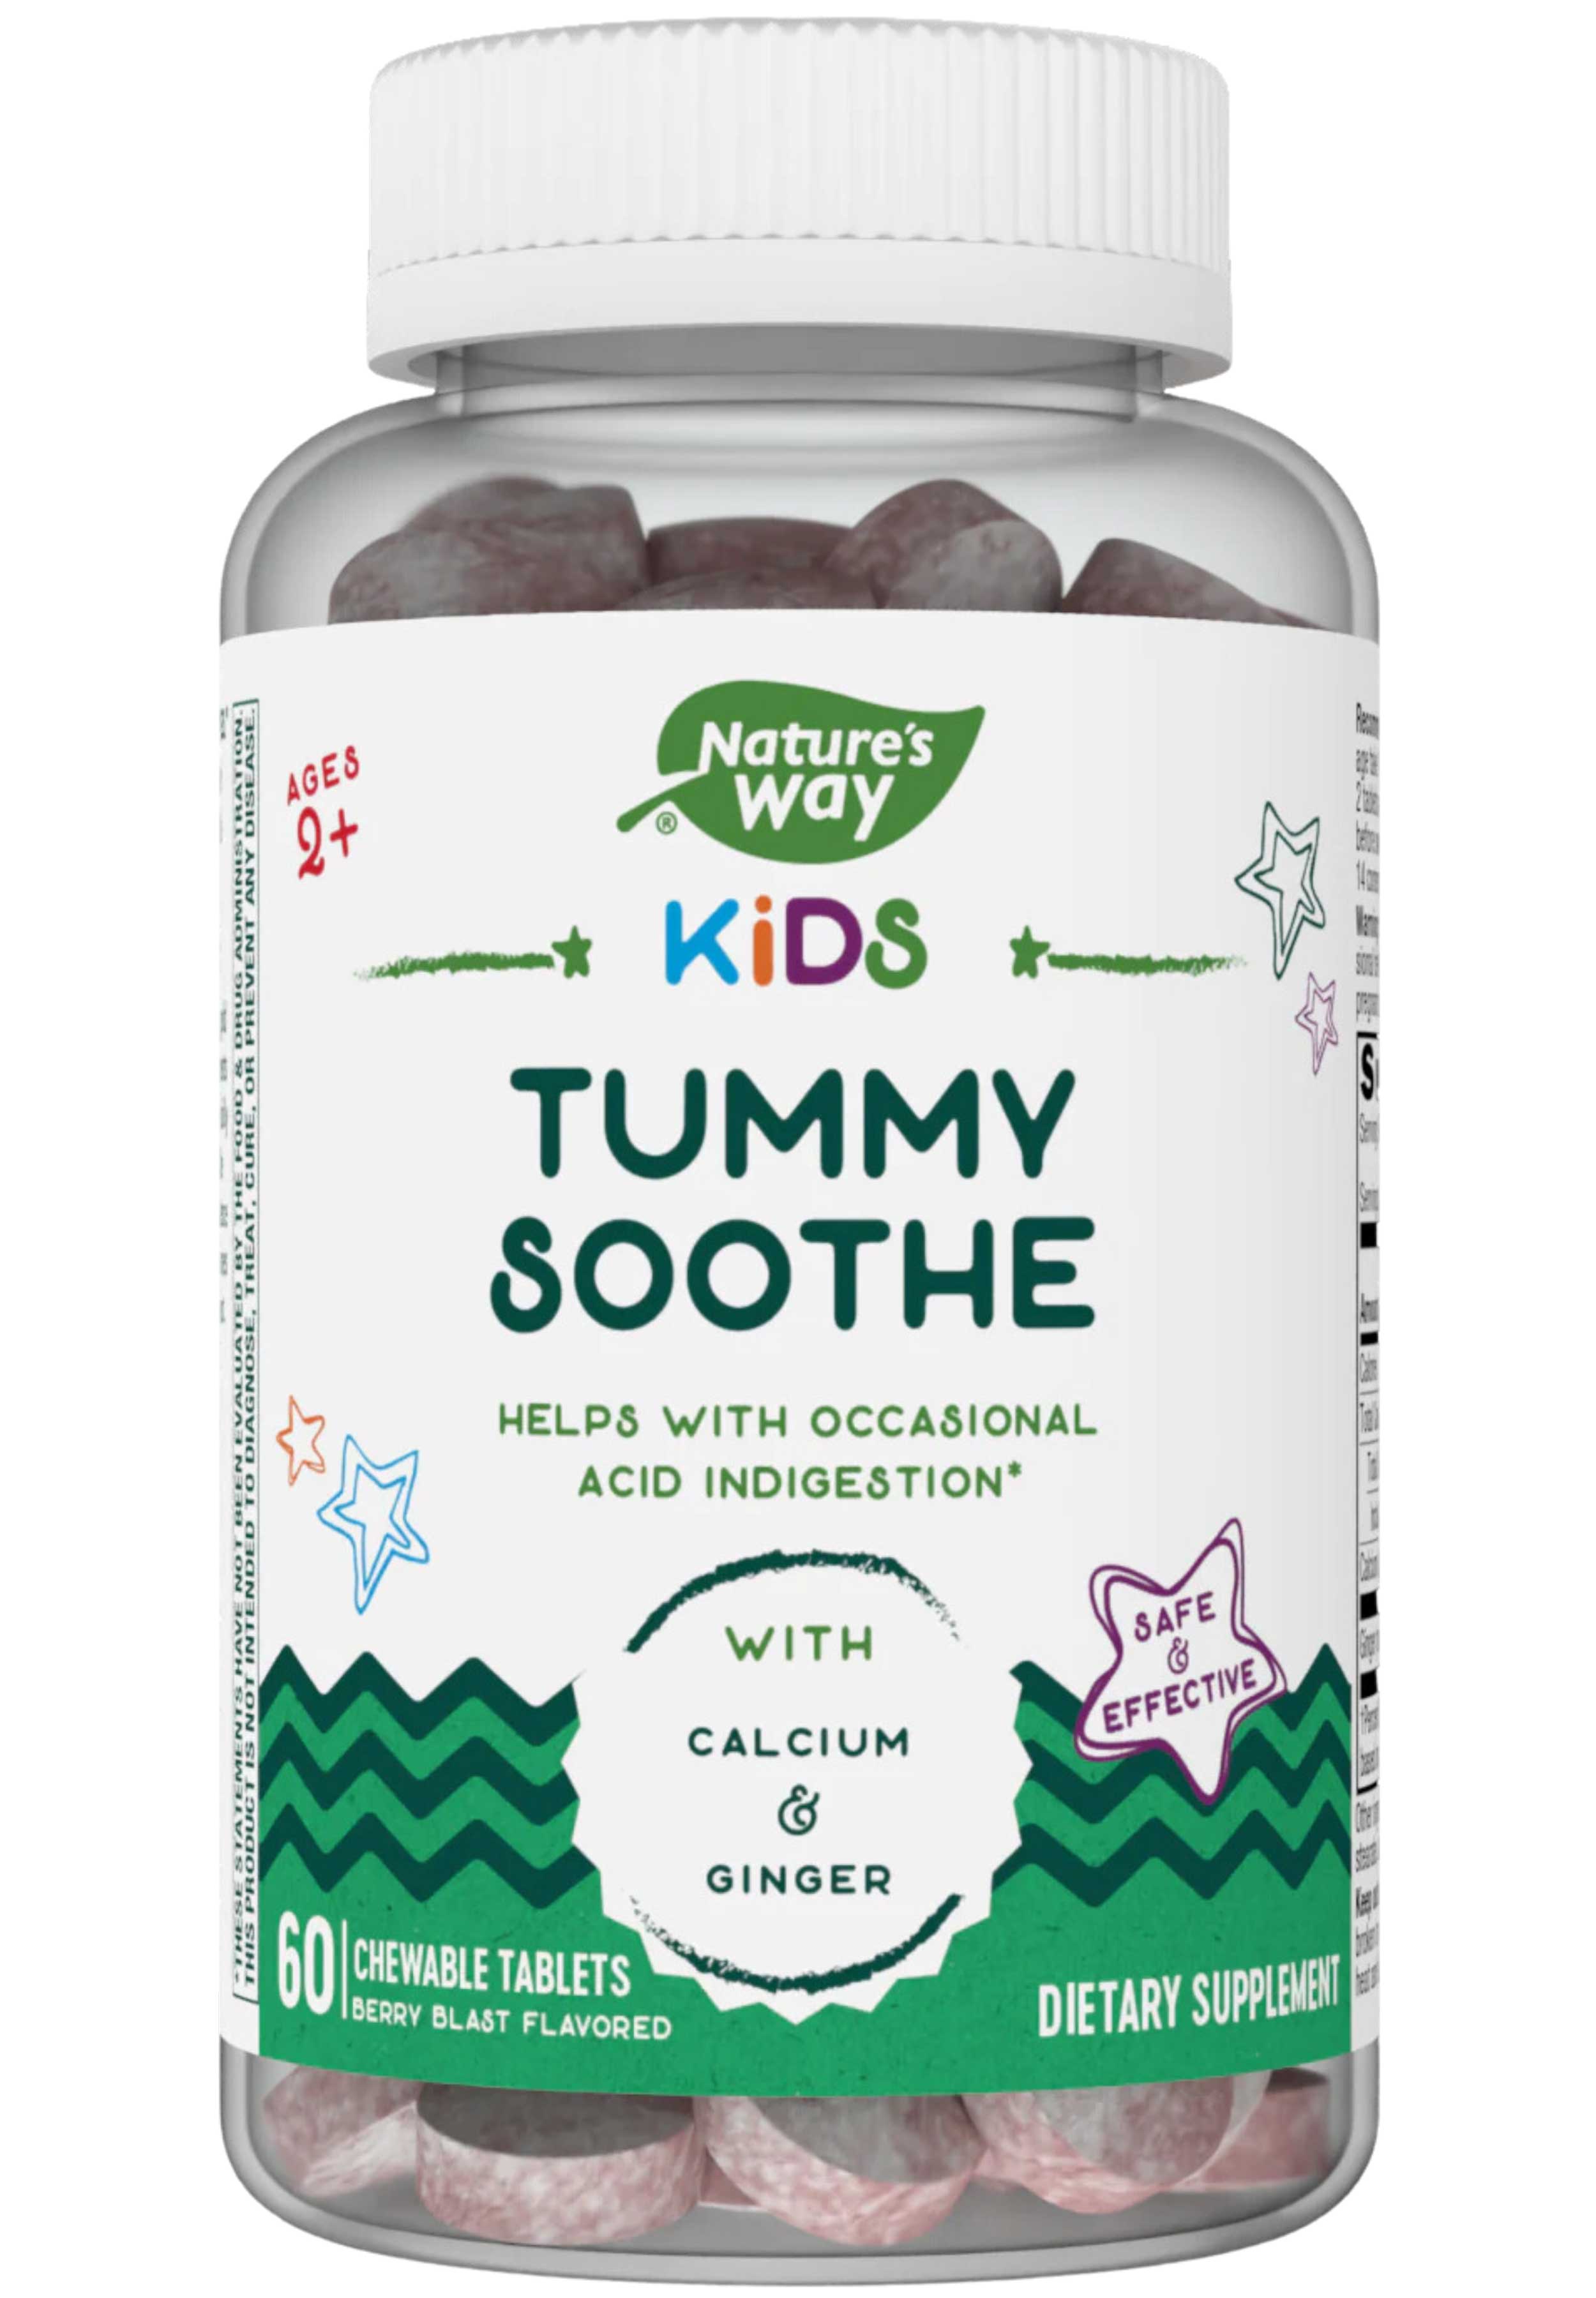 Nature's Way Tummy Soothe Kids